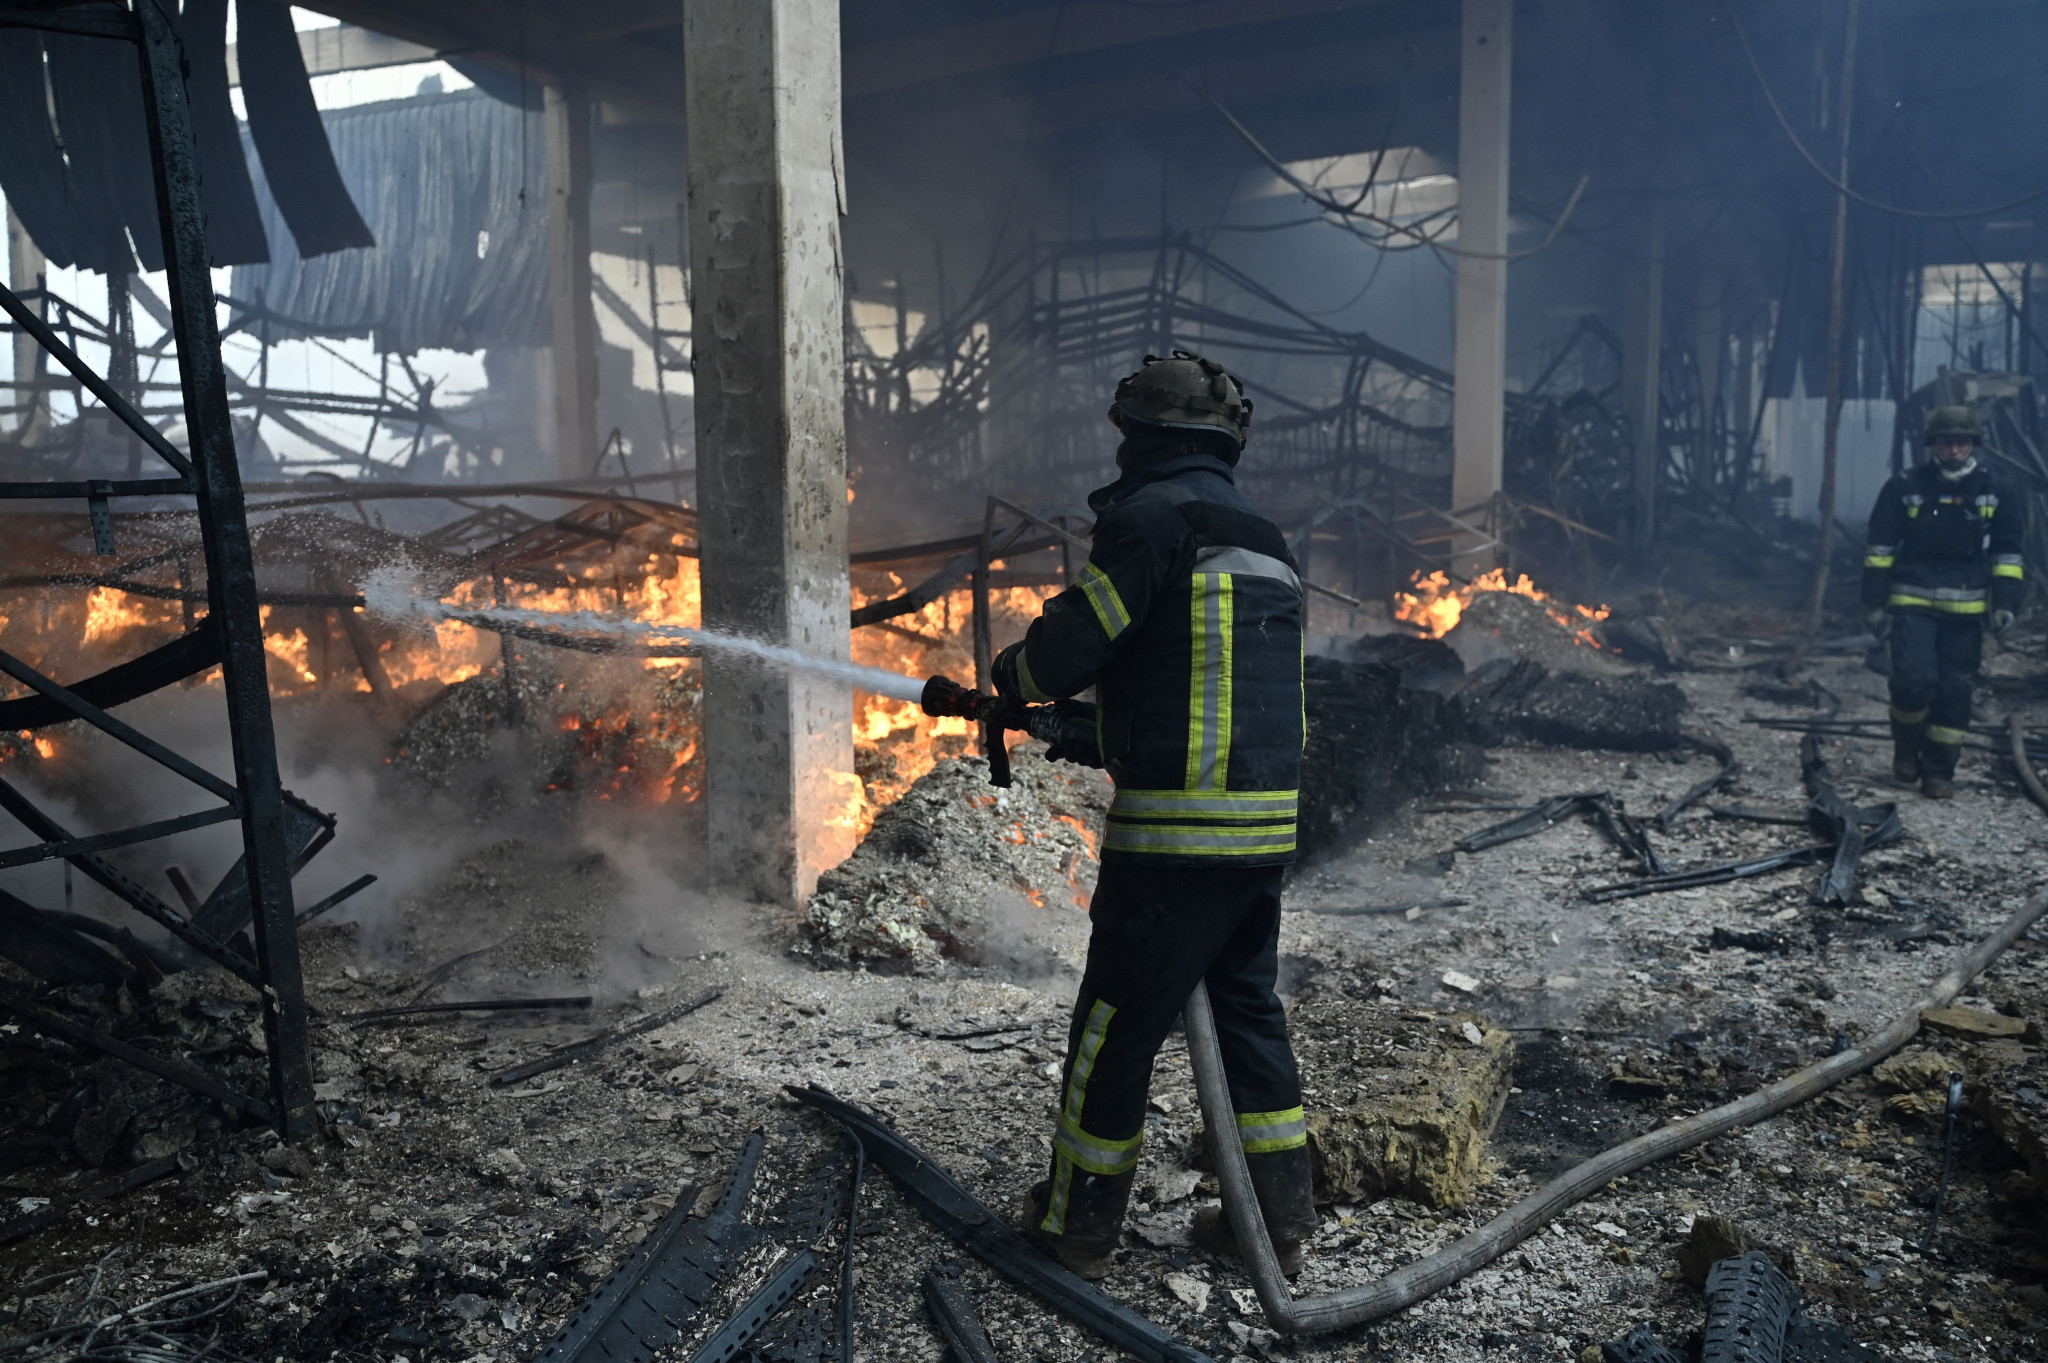 Ukrainian firefighters put out fire in a hardware shopping mall following shelling in Kherson as the country remains under attack from Russian forces ©Getty Images